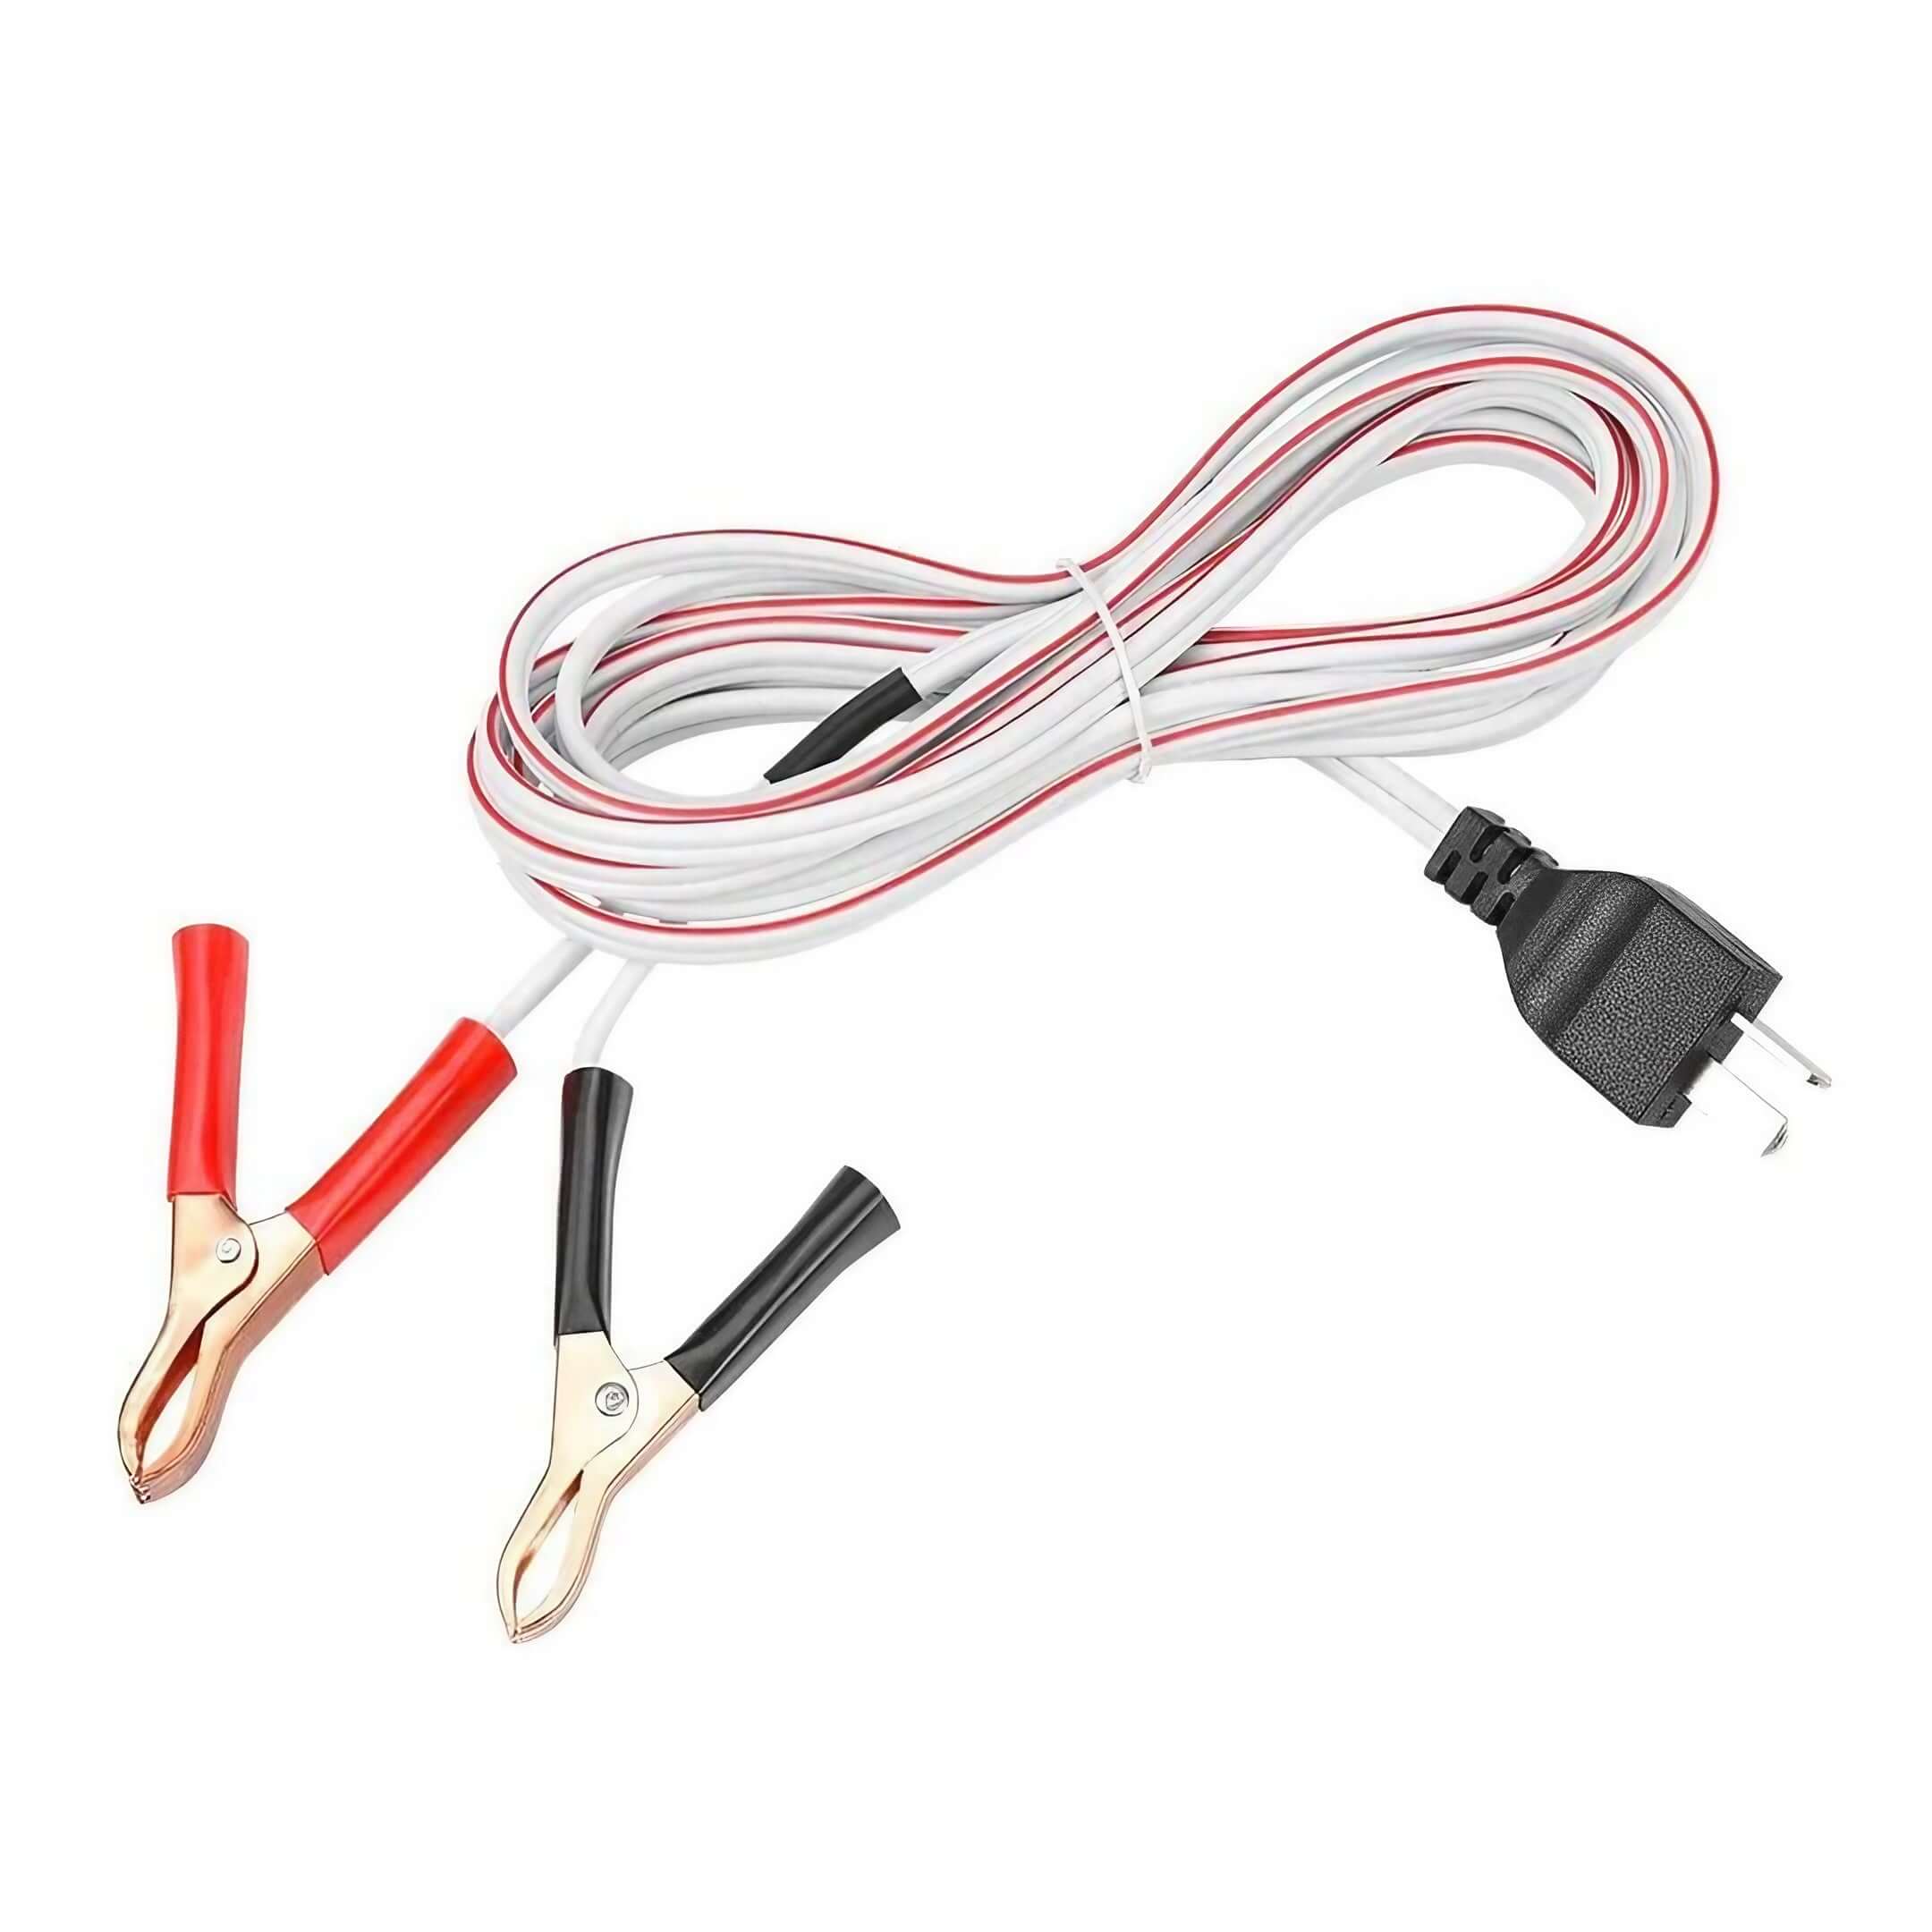 ALP Generator DC charging cables with color-coded wires